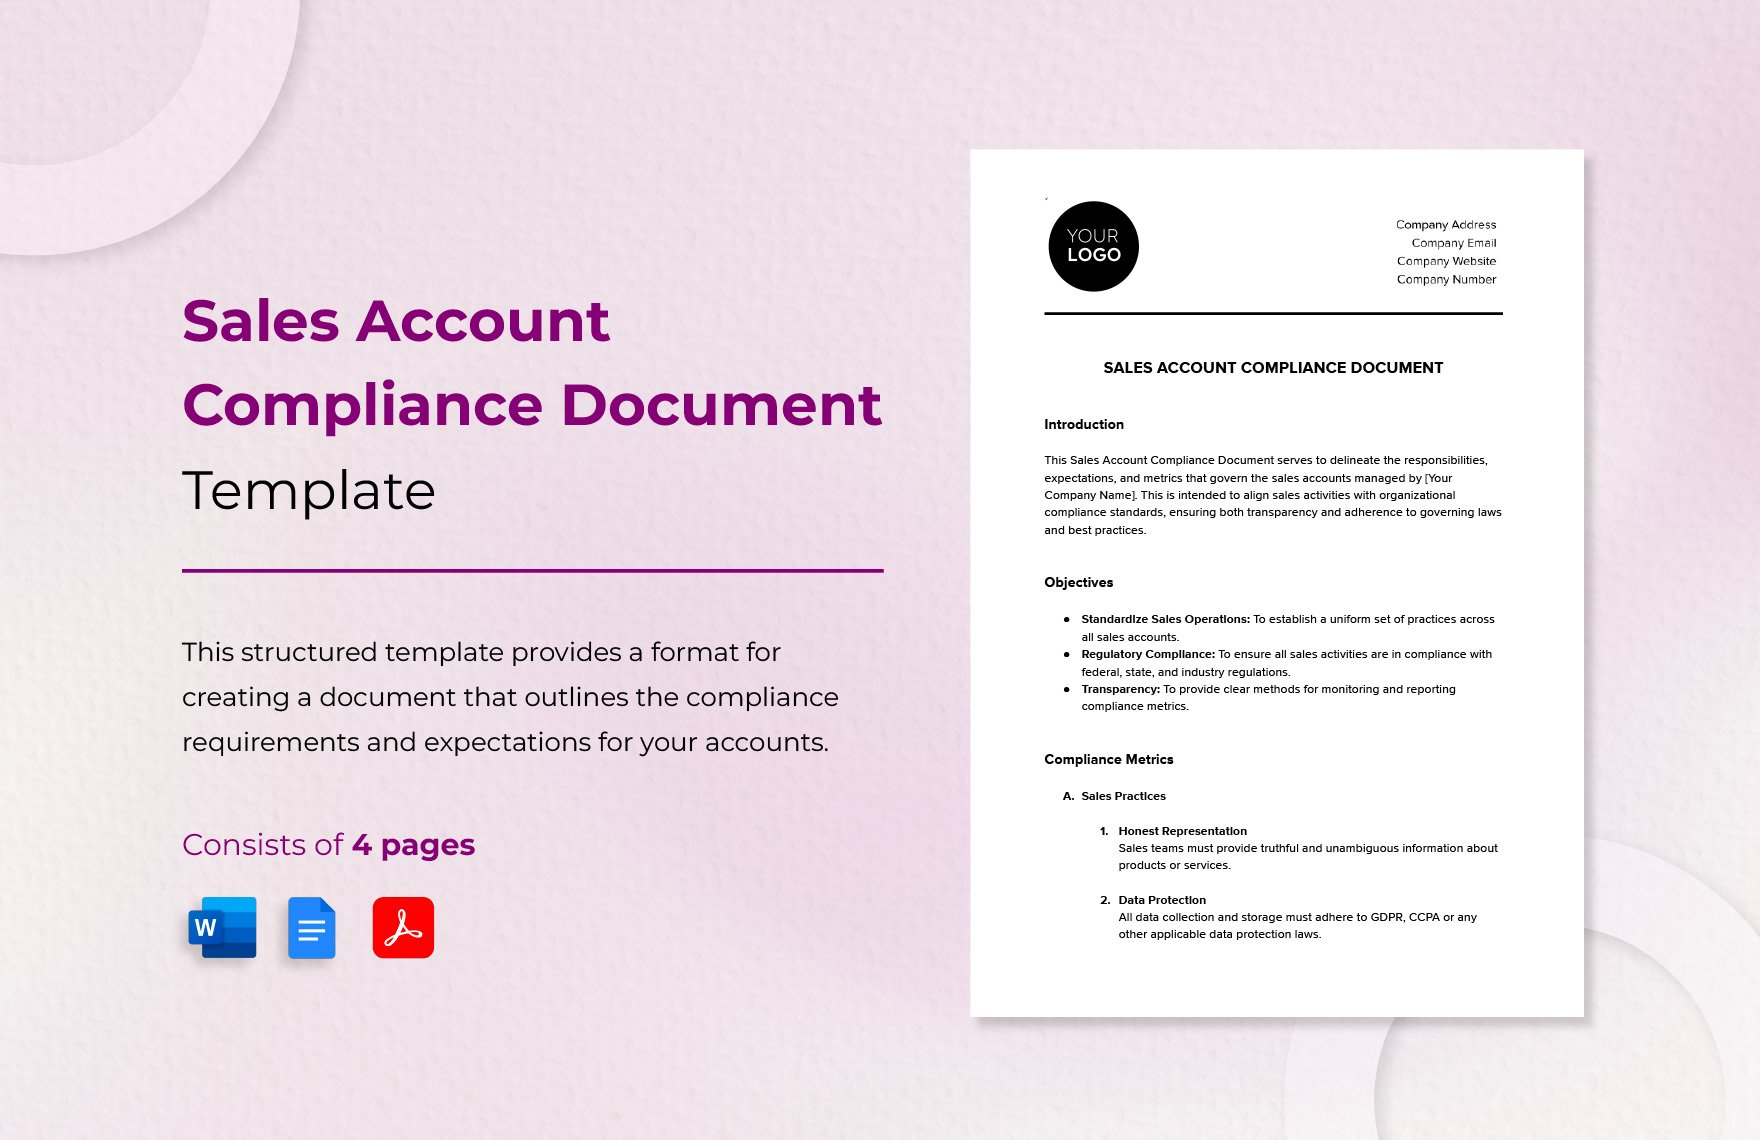 Sales Account Compliance Document Template in Word, Google Docs, PDF